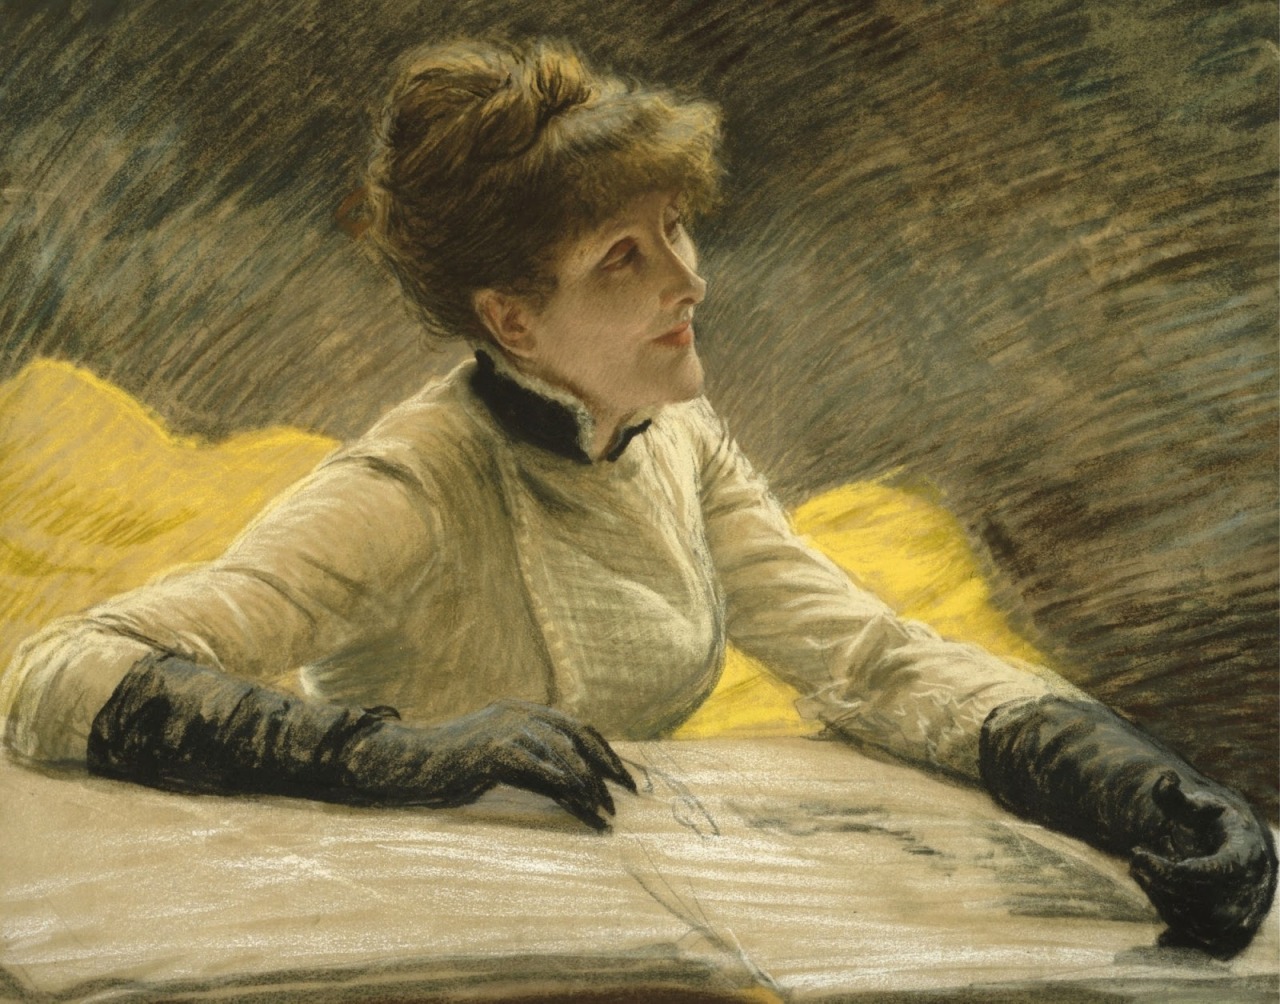 Admiring a Portfolio (c.1883). James Jacques Joseph Tissot (French, 1836-1902). Pastel on linen.
Shows Tissot’s skill at using pastel, and his ability to capture subtle qualities of light and shade. The main light source is behind the sitter,...